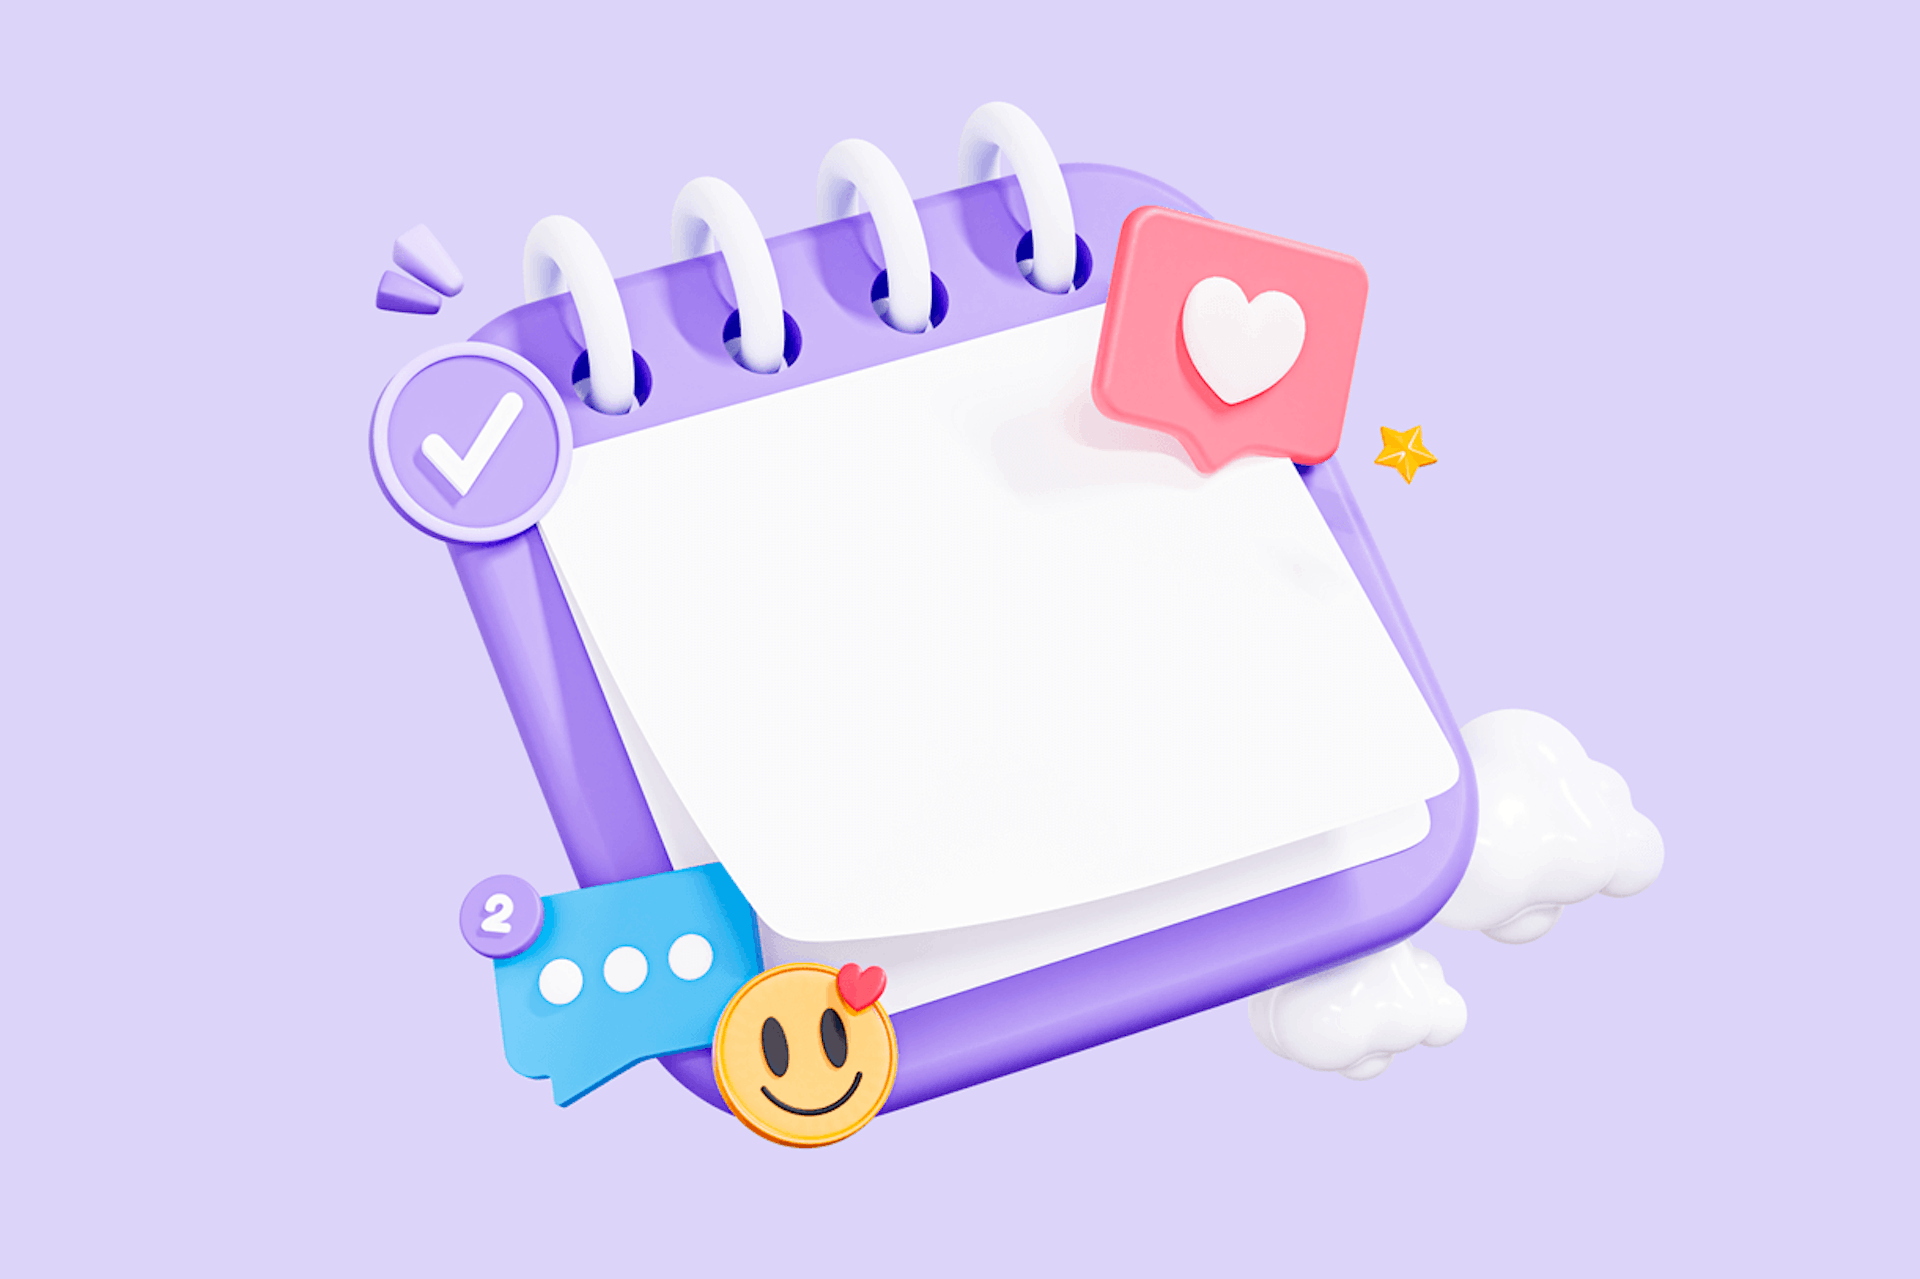 An illustration showing a spiral rip-off 365 day calendar on a light purple background, surrounded by social media icons including a like button, smily face, and messenger dots. Ultimate guide to 2024 social media holidays and celebrations. 